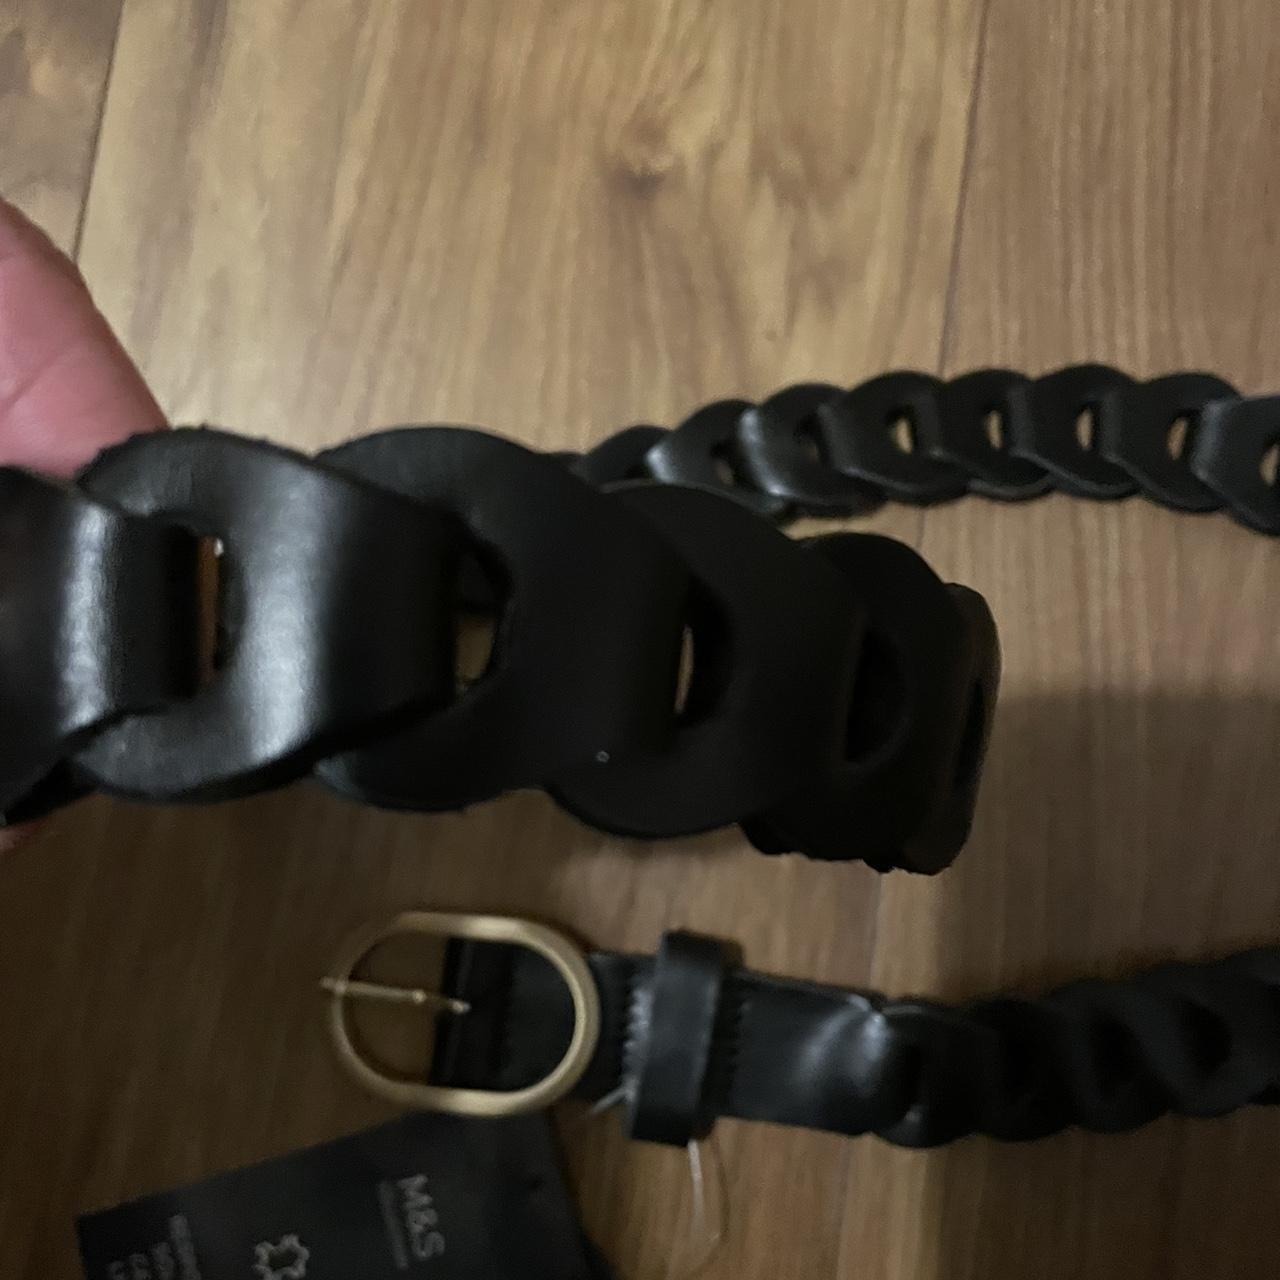 Black Leather Belt, M&S Collection